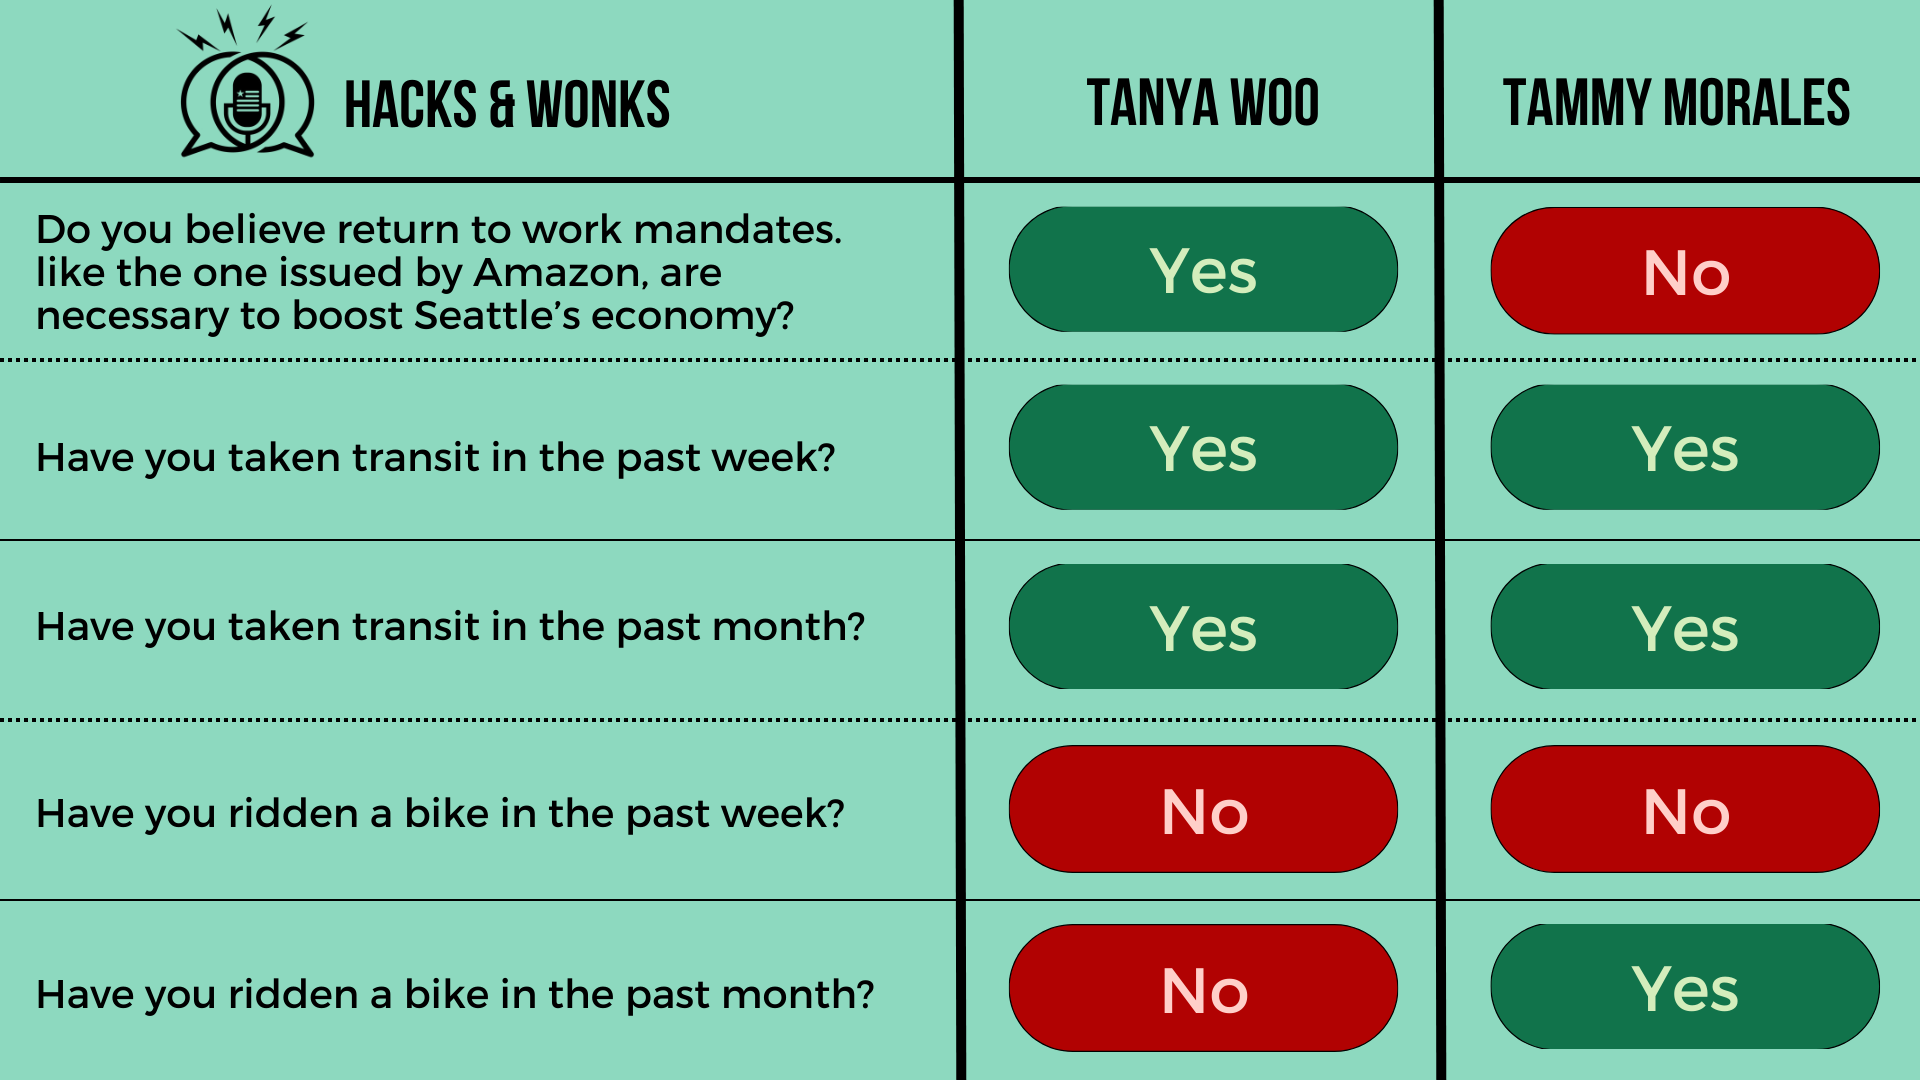 Q: Do you believe return to work mandates. like the one issued by Amazon, are necessary to boost Seattle’s economy? Tanya Woo: Yes, Tammy Morales: No  Q: Have you taken transit in the past week? Tanya Woo: Yes, Tammy Morales: Yes  Q: Have you taken t